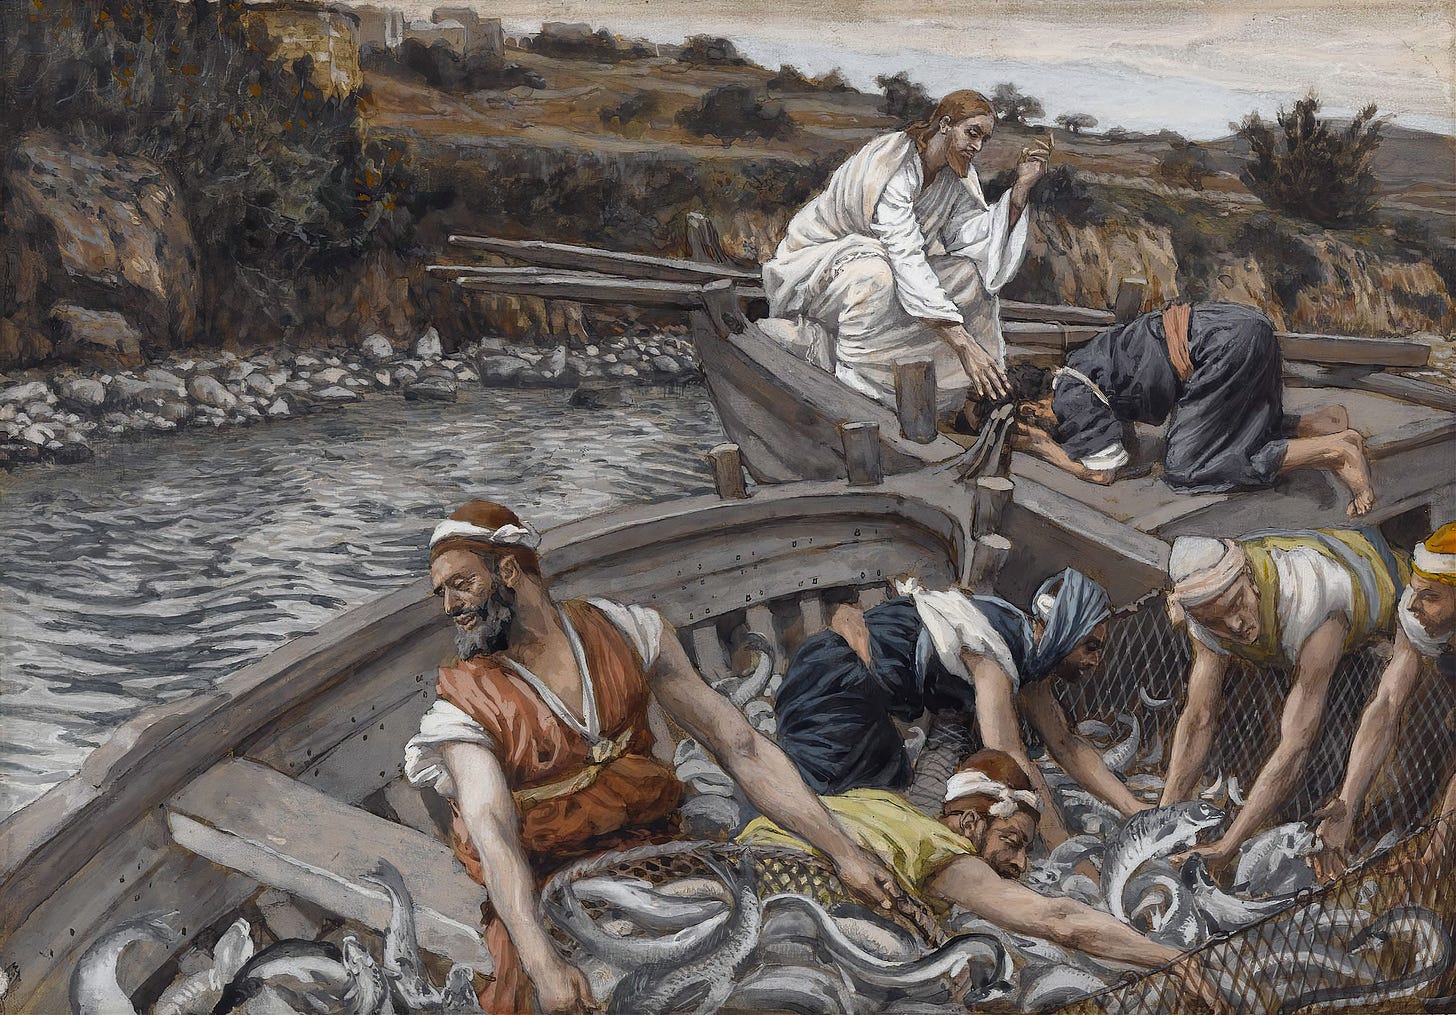 The Miraculous Draught of Fishes (1886-1894) by James Tissot